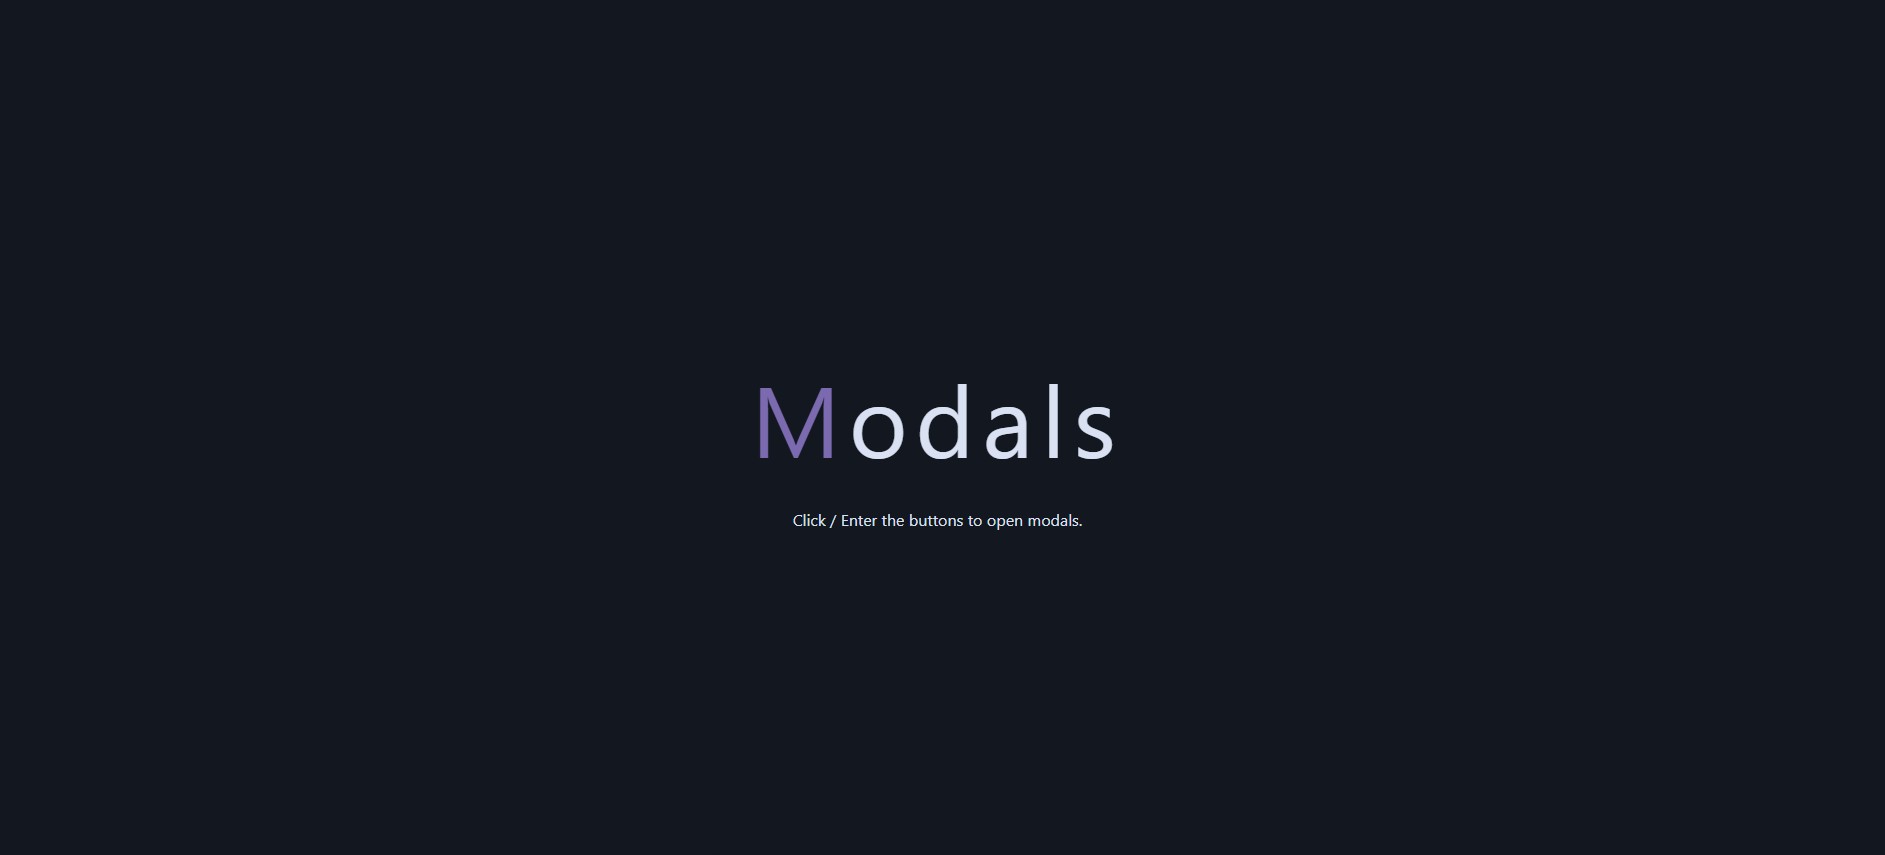 15 Modal / Popup Windows Created With Only CSS - 1stWebDesigner